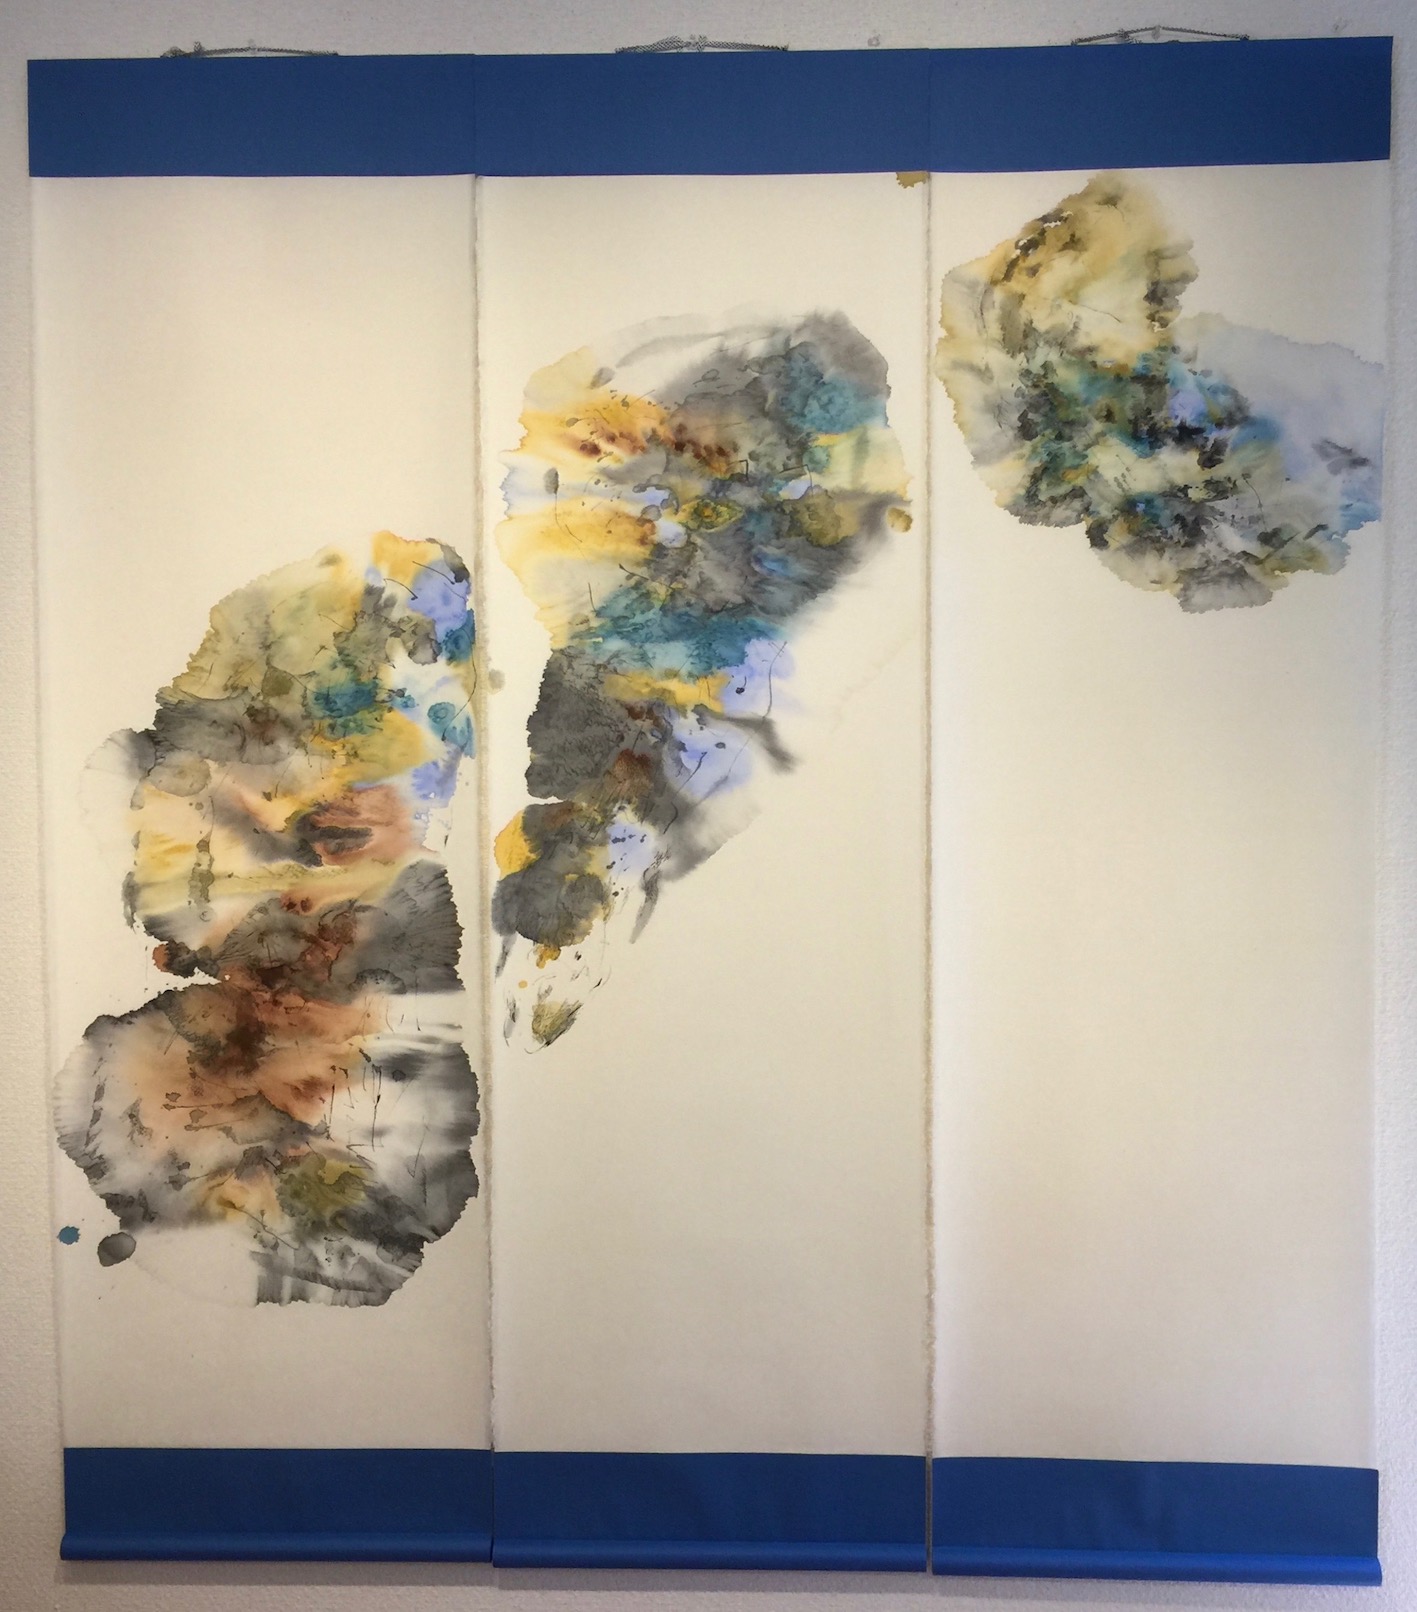 Earth Wave 土の波 143 cms x 51 cms x 3 Sumi ink,water colour, acrylic 墨、水彩絵具、アクリル　2021